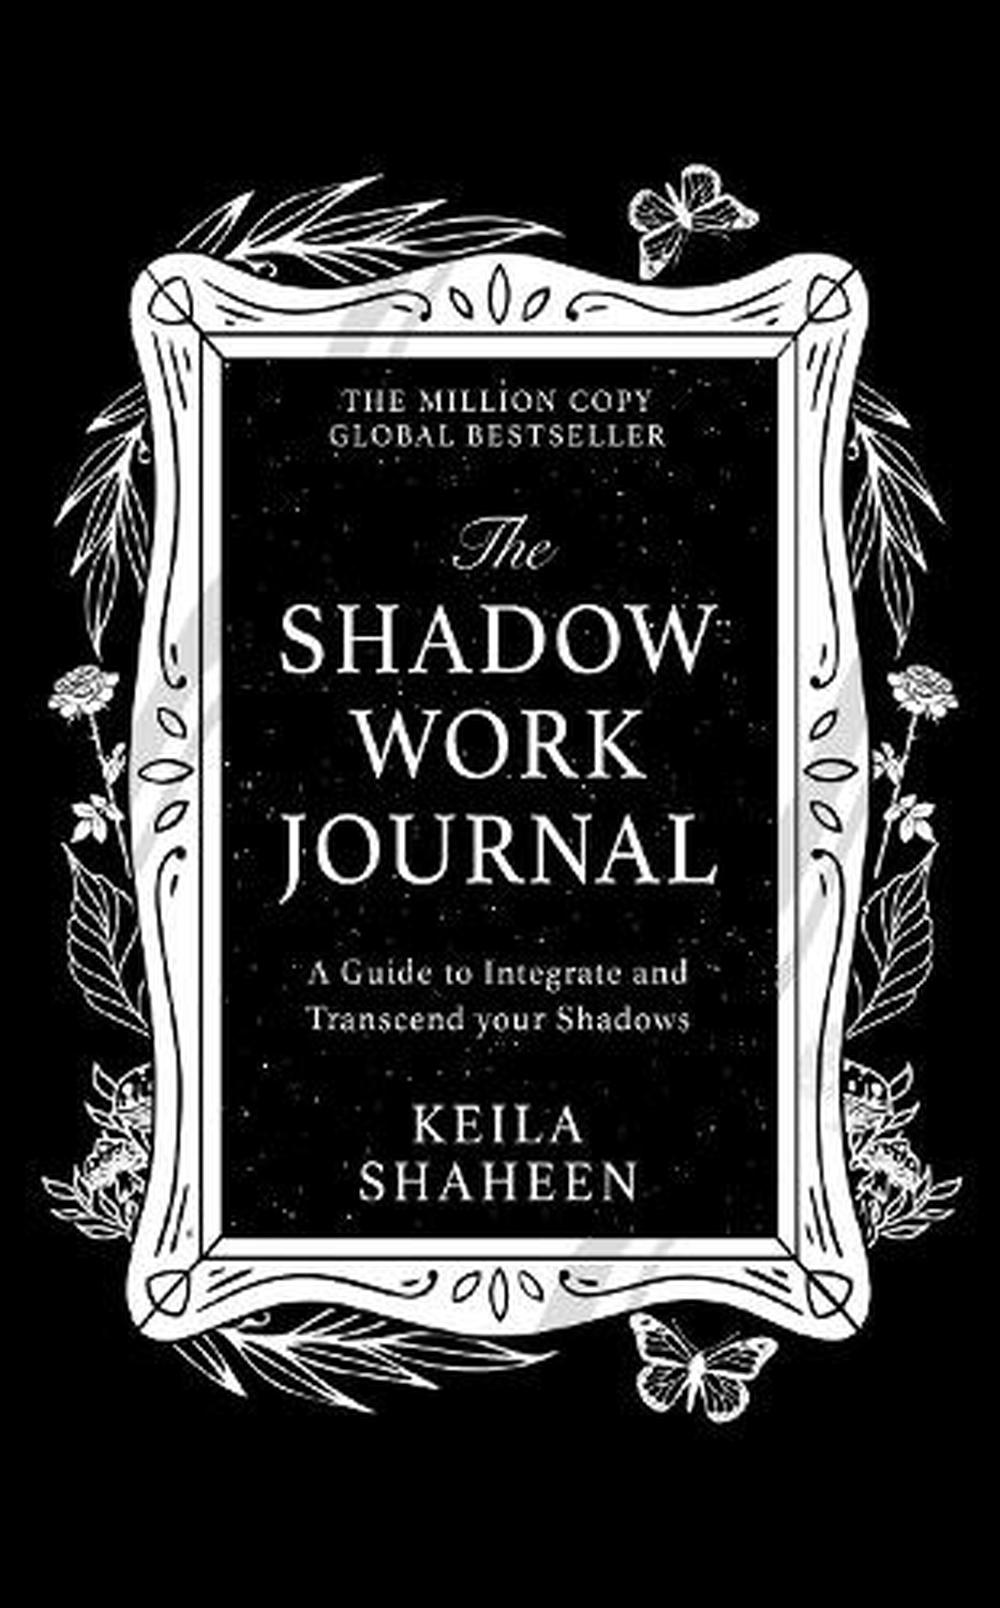 THE SHADOW WORK JOURNAL